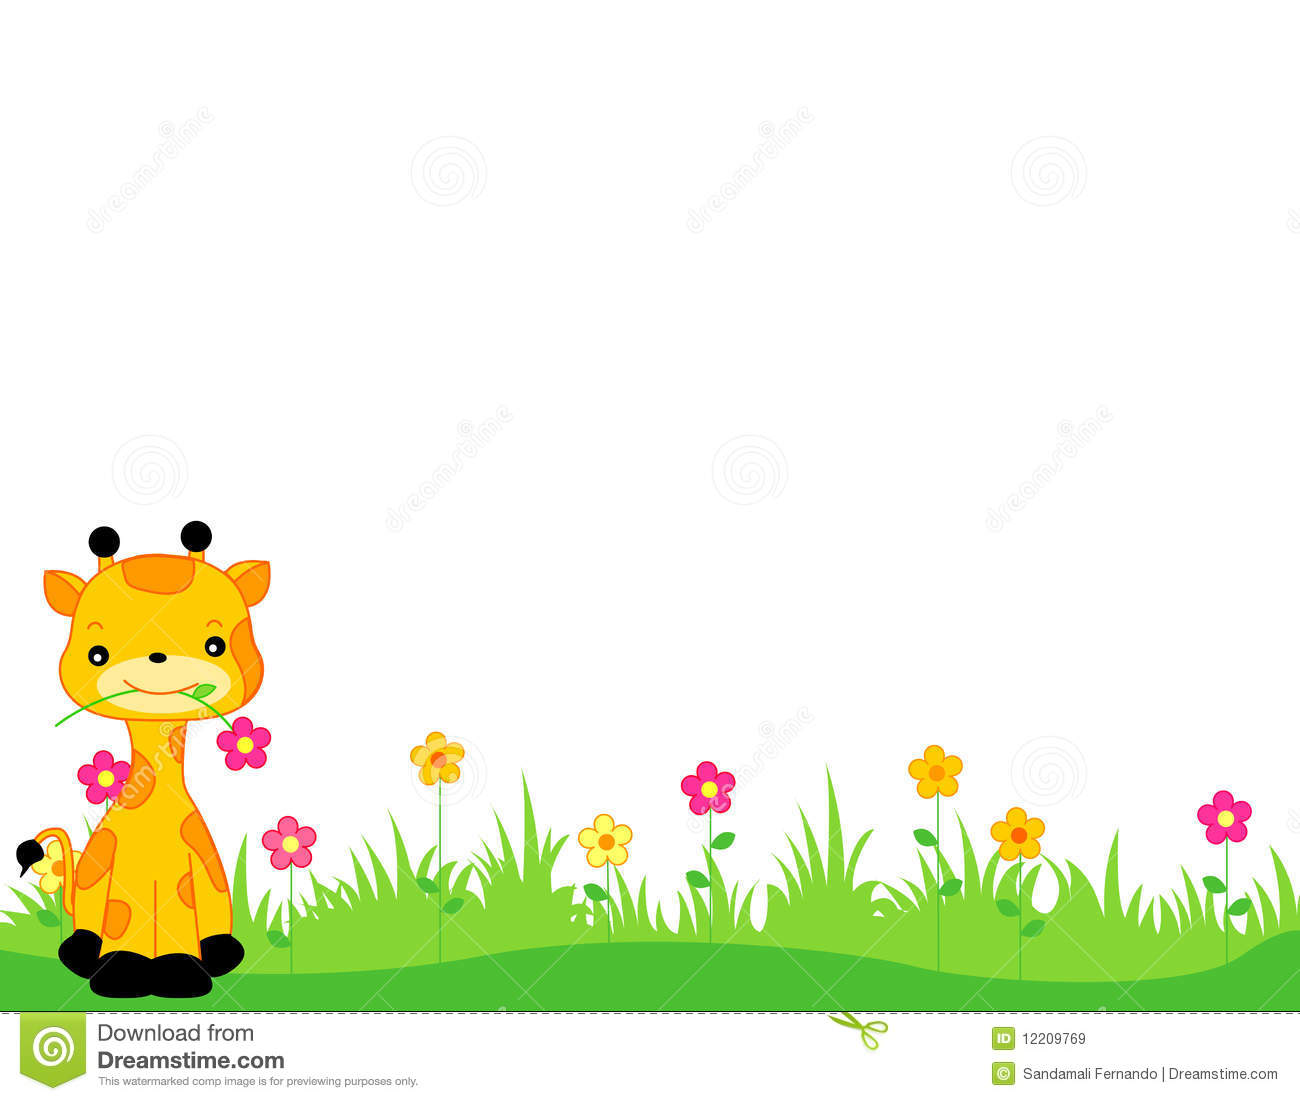 Cute Giraffe With A Flower On Its Mouth Sitting On Grass Web Page